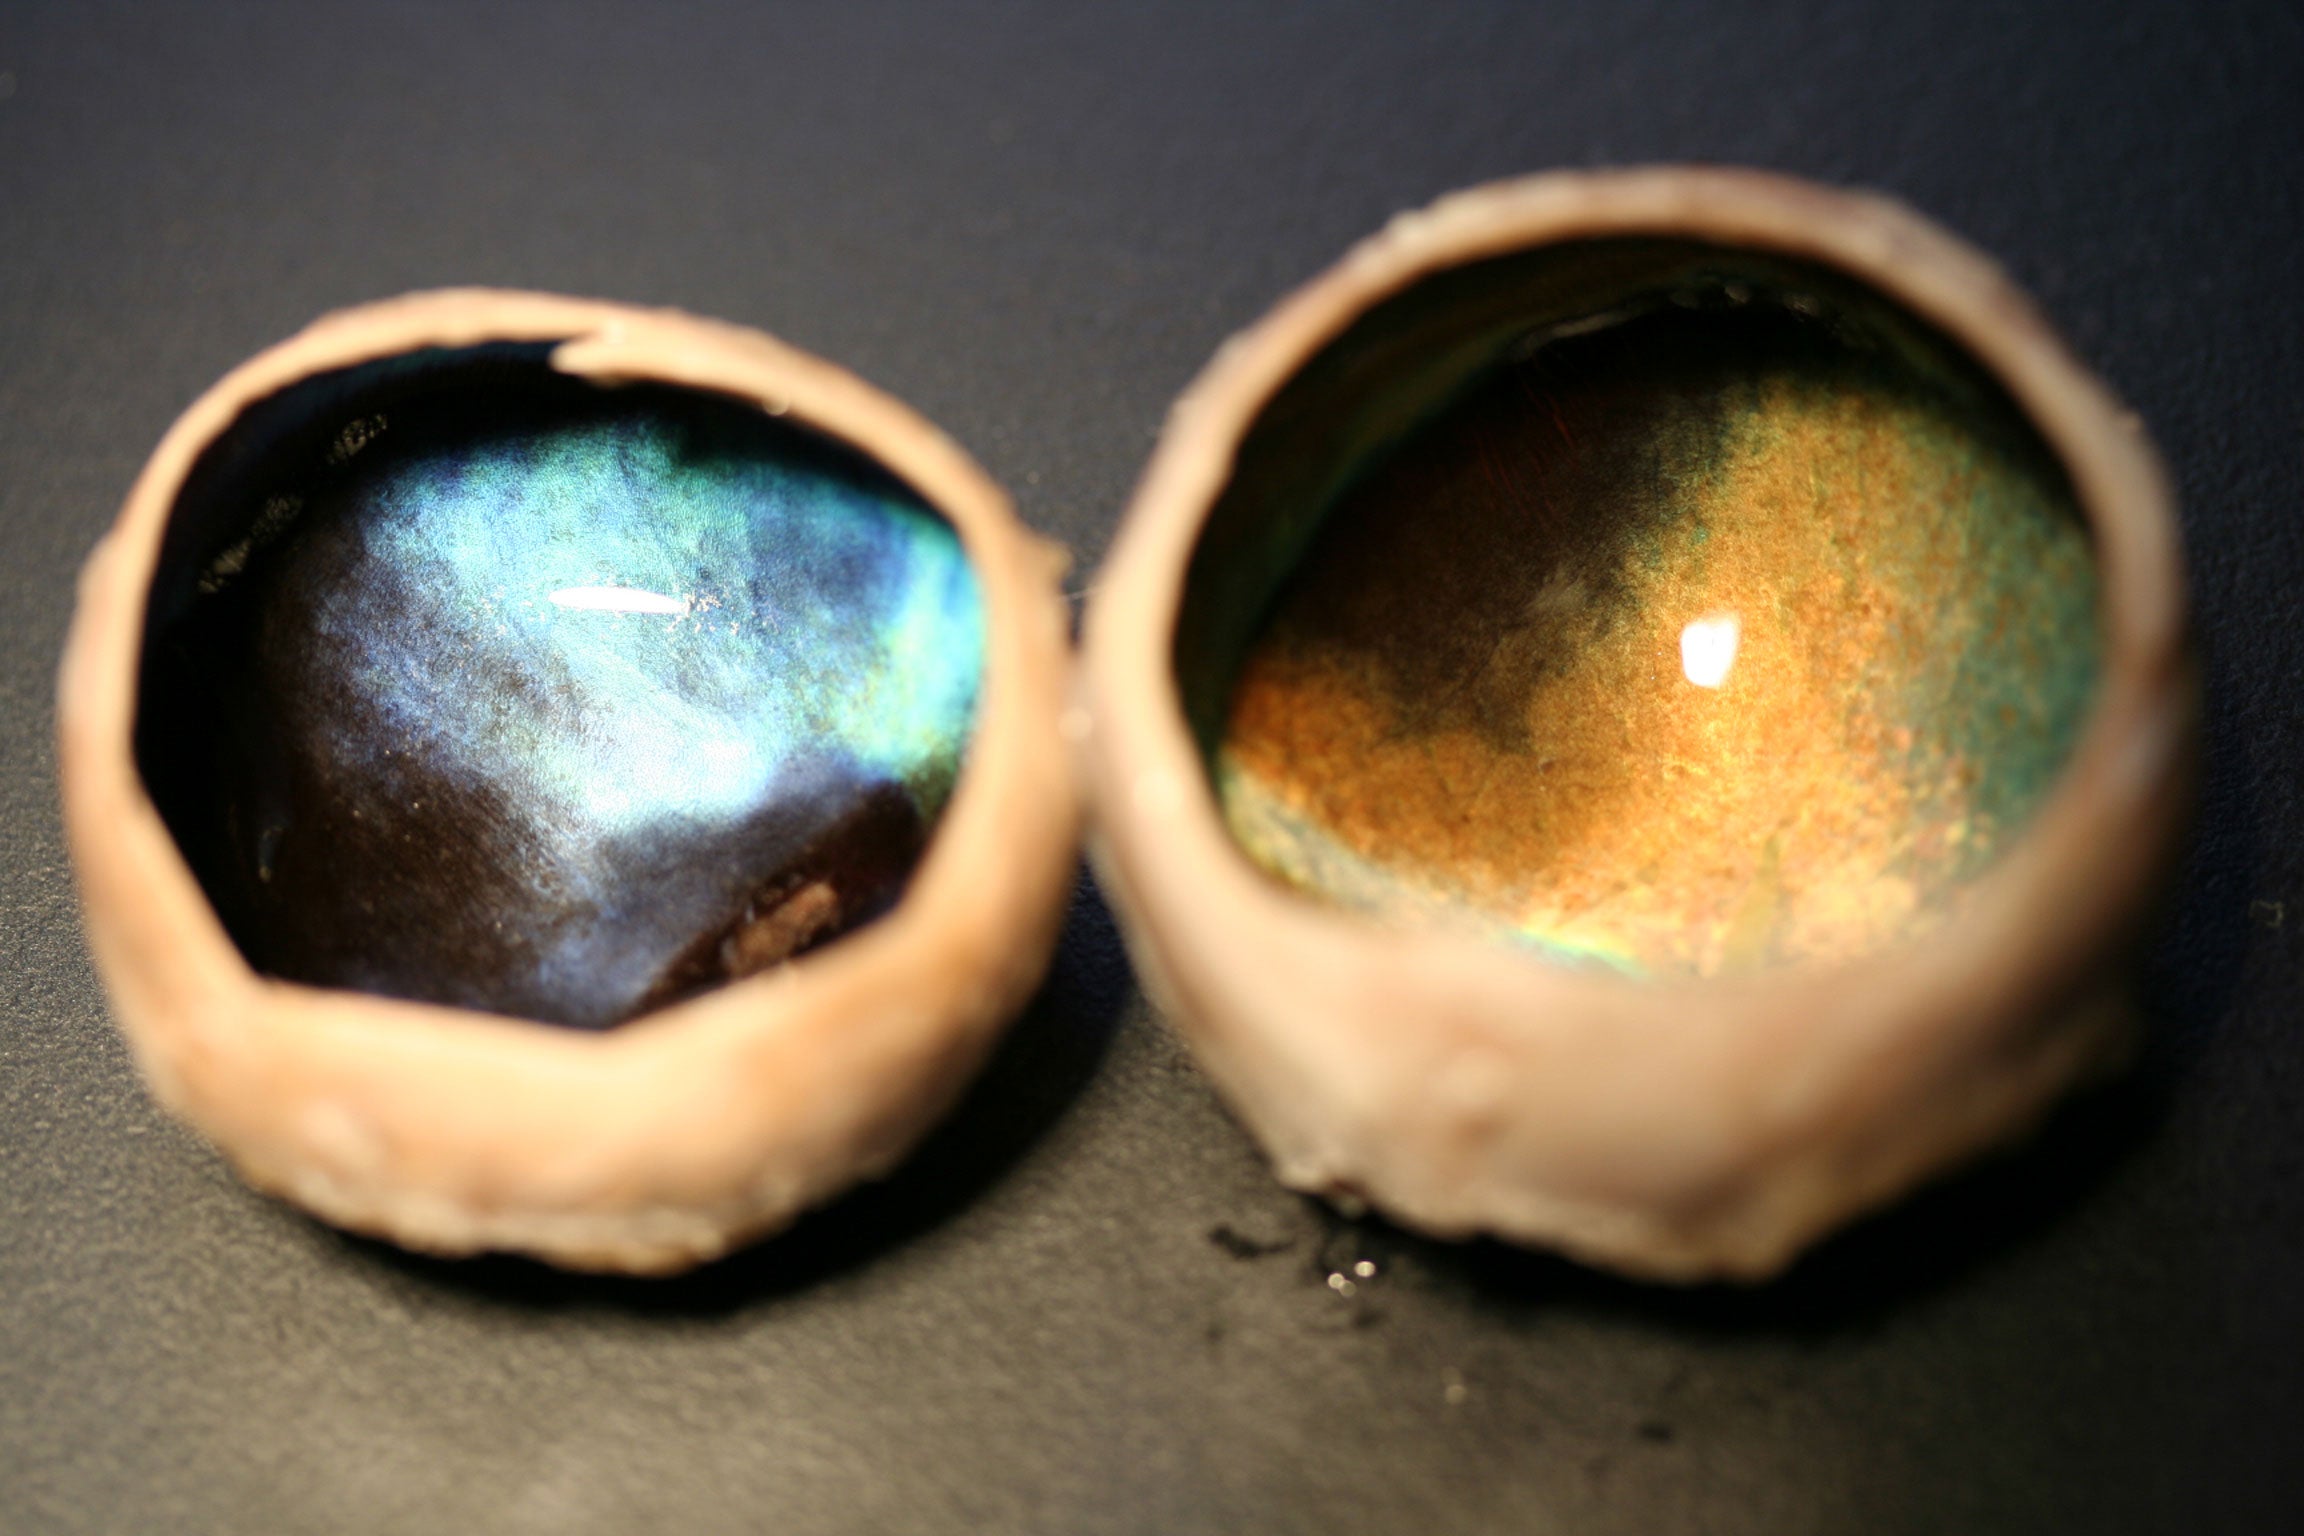 Two dissected reindeer eyes - one from an animal which died during the winter